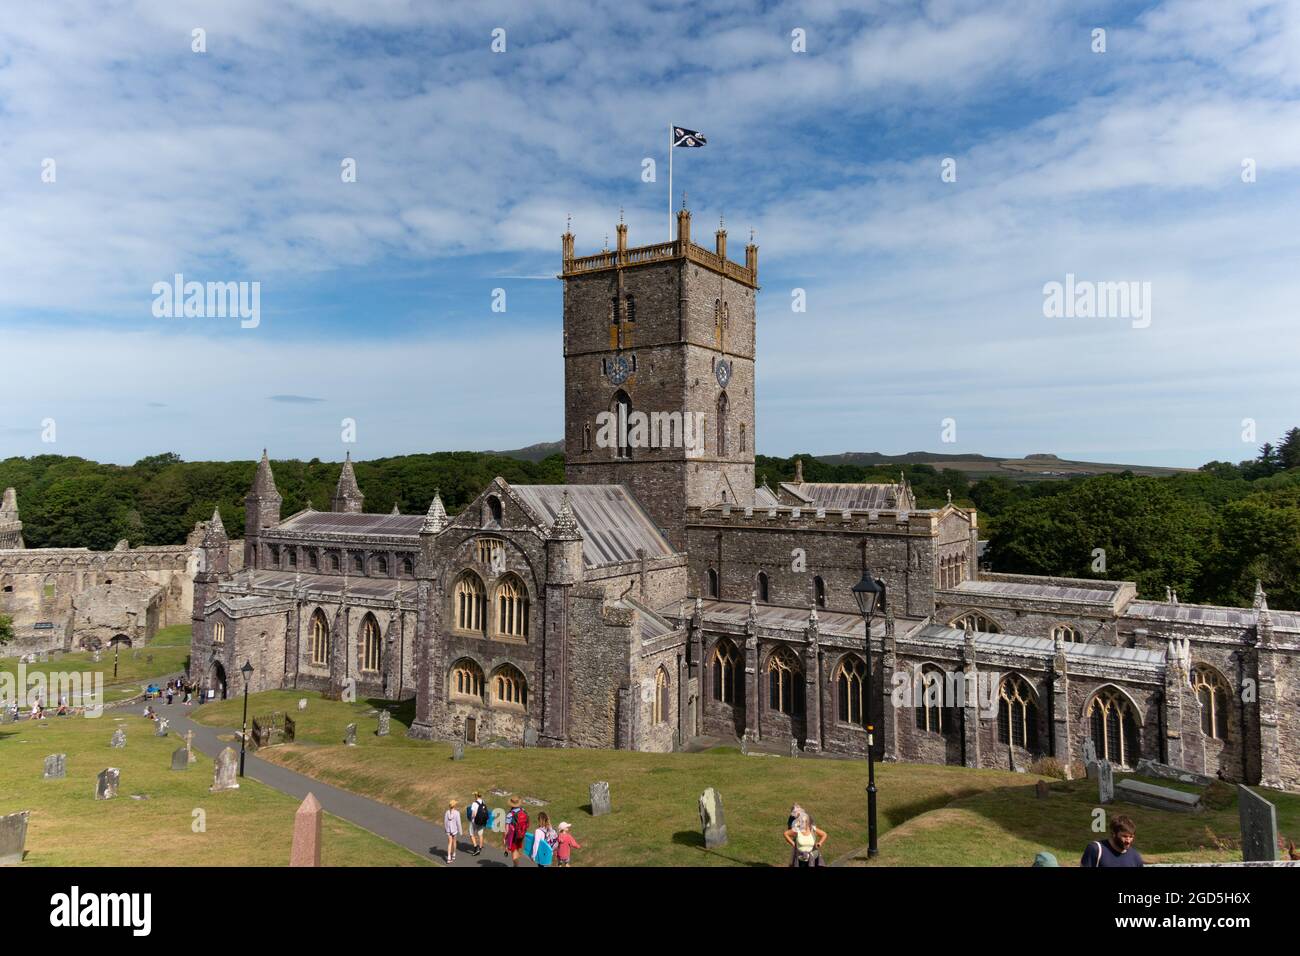 A view of Saint David's Cathedral in the Welsh city of Saint Davids. Stock Photo